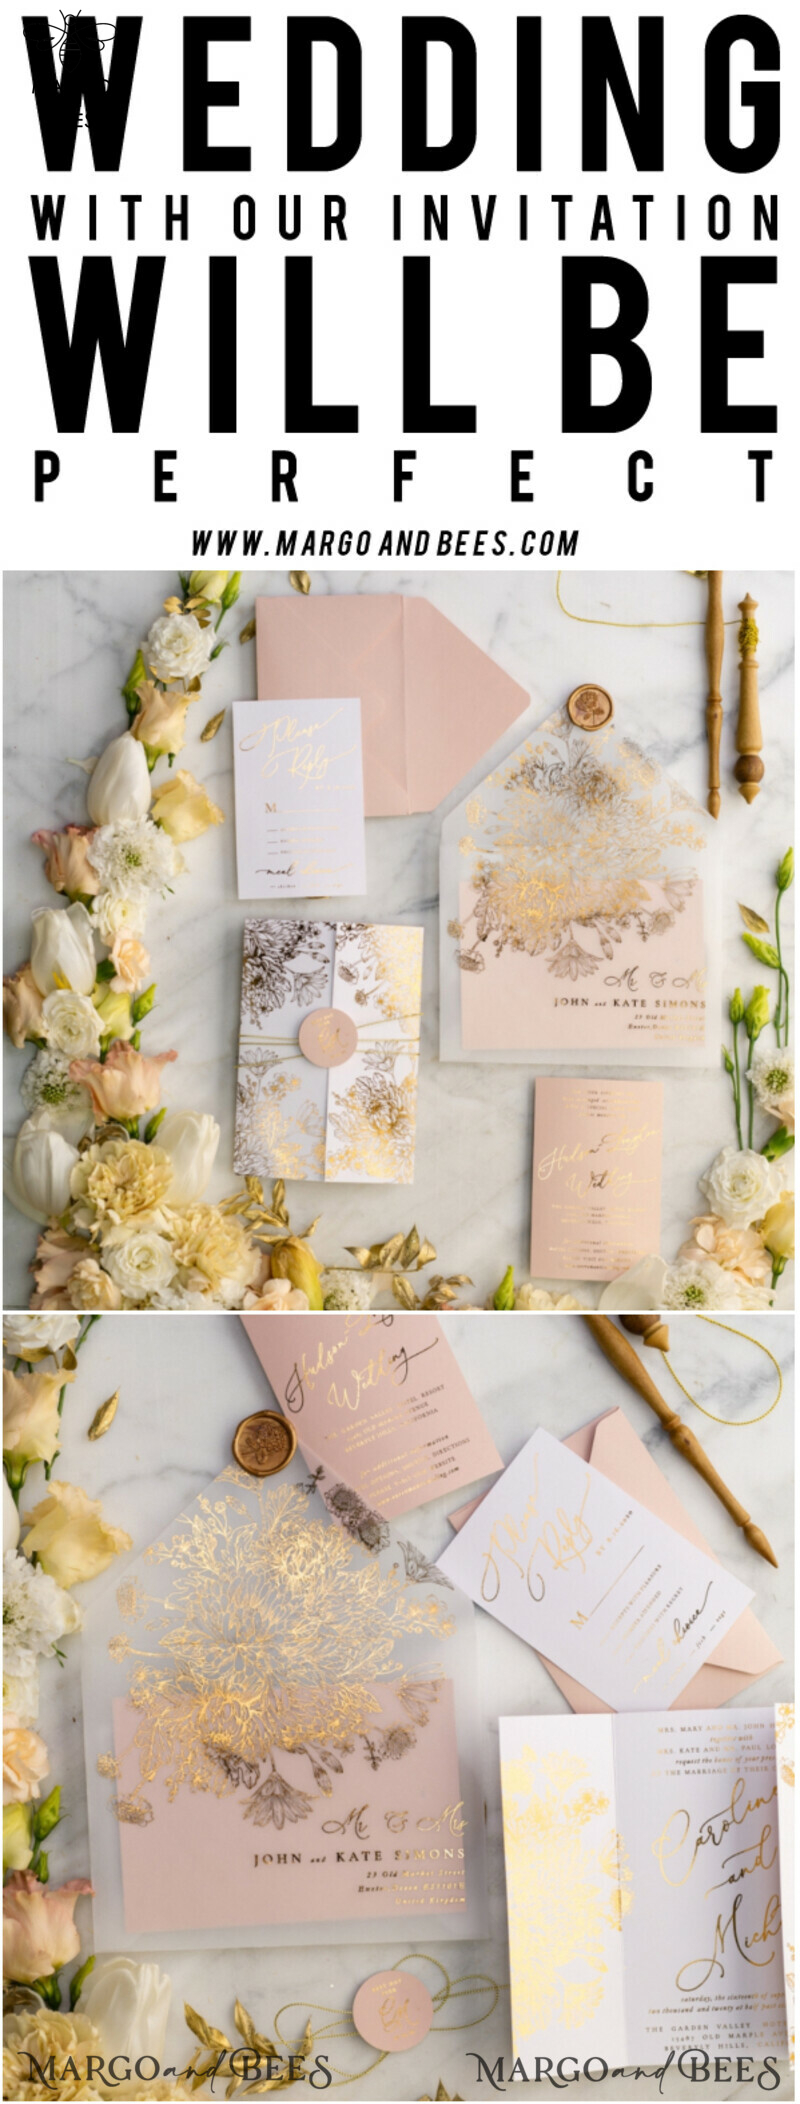 Elegant Arabic Golden Wedding Invitations with Glamour Gold Foil and Romantic Blush Pink, Exquisite Bespoke Indian Wedding Stationery-37